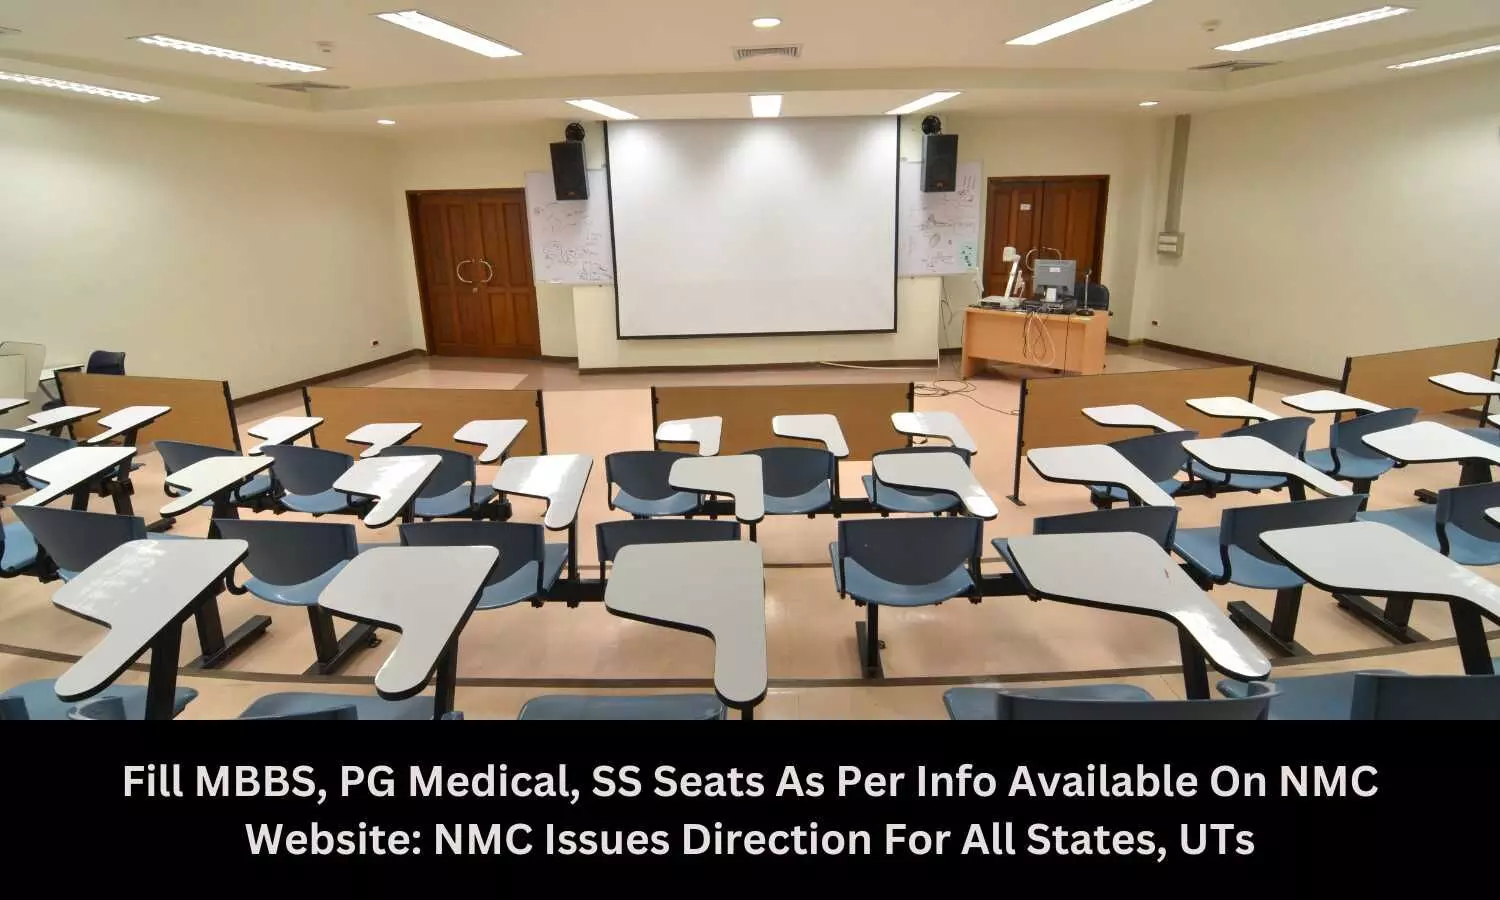 DME in all states, UTs must fill MBBS, PG medical, SS seats as per info available on NMC website, directs NMC